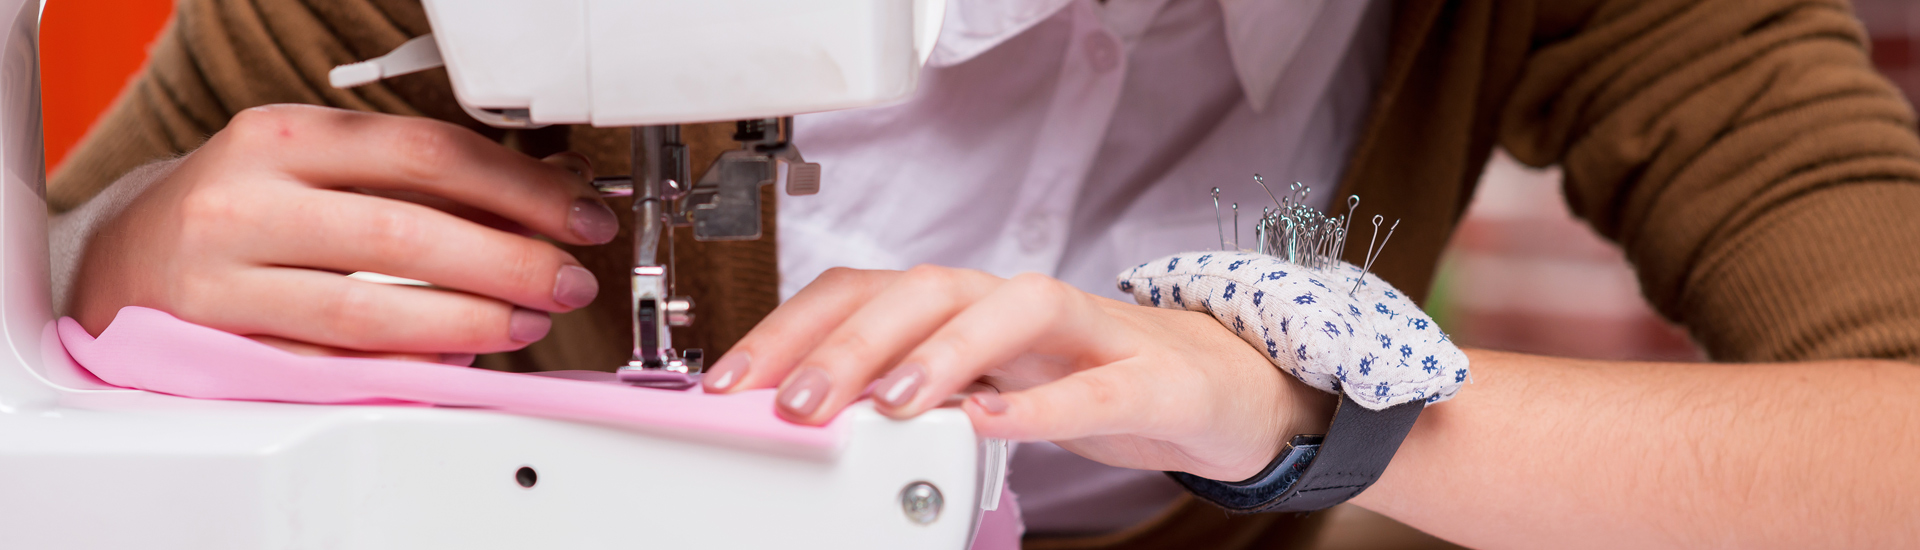 Woman Working On Sewing Machine